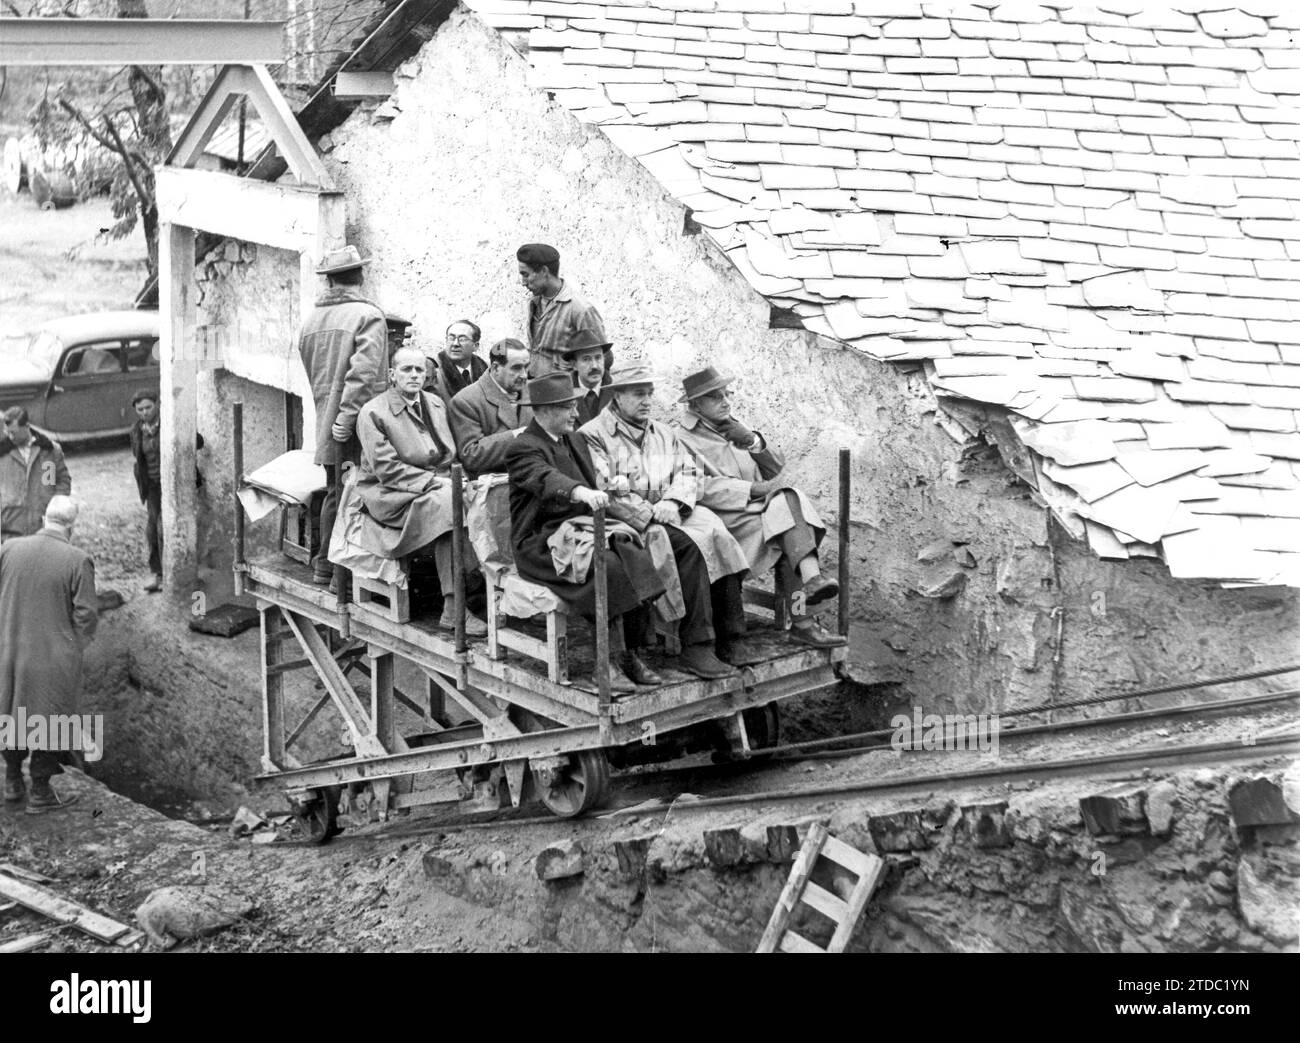 01/09/1959. The Minister of Public Works, Mr. Vigón, Using the Funicular to Approach the Gap Opened by the Waters in the Retaining Wall. He is accompanied, among other personalities, by the civil governor of Zamora, Don Julio Murillo de Valdivia, who has per. Credit: Album / Archivo ABC / Basabe Stock Photo